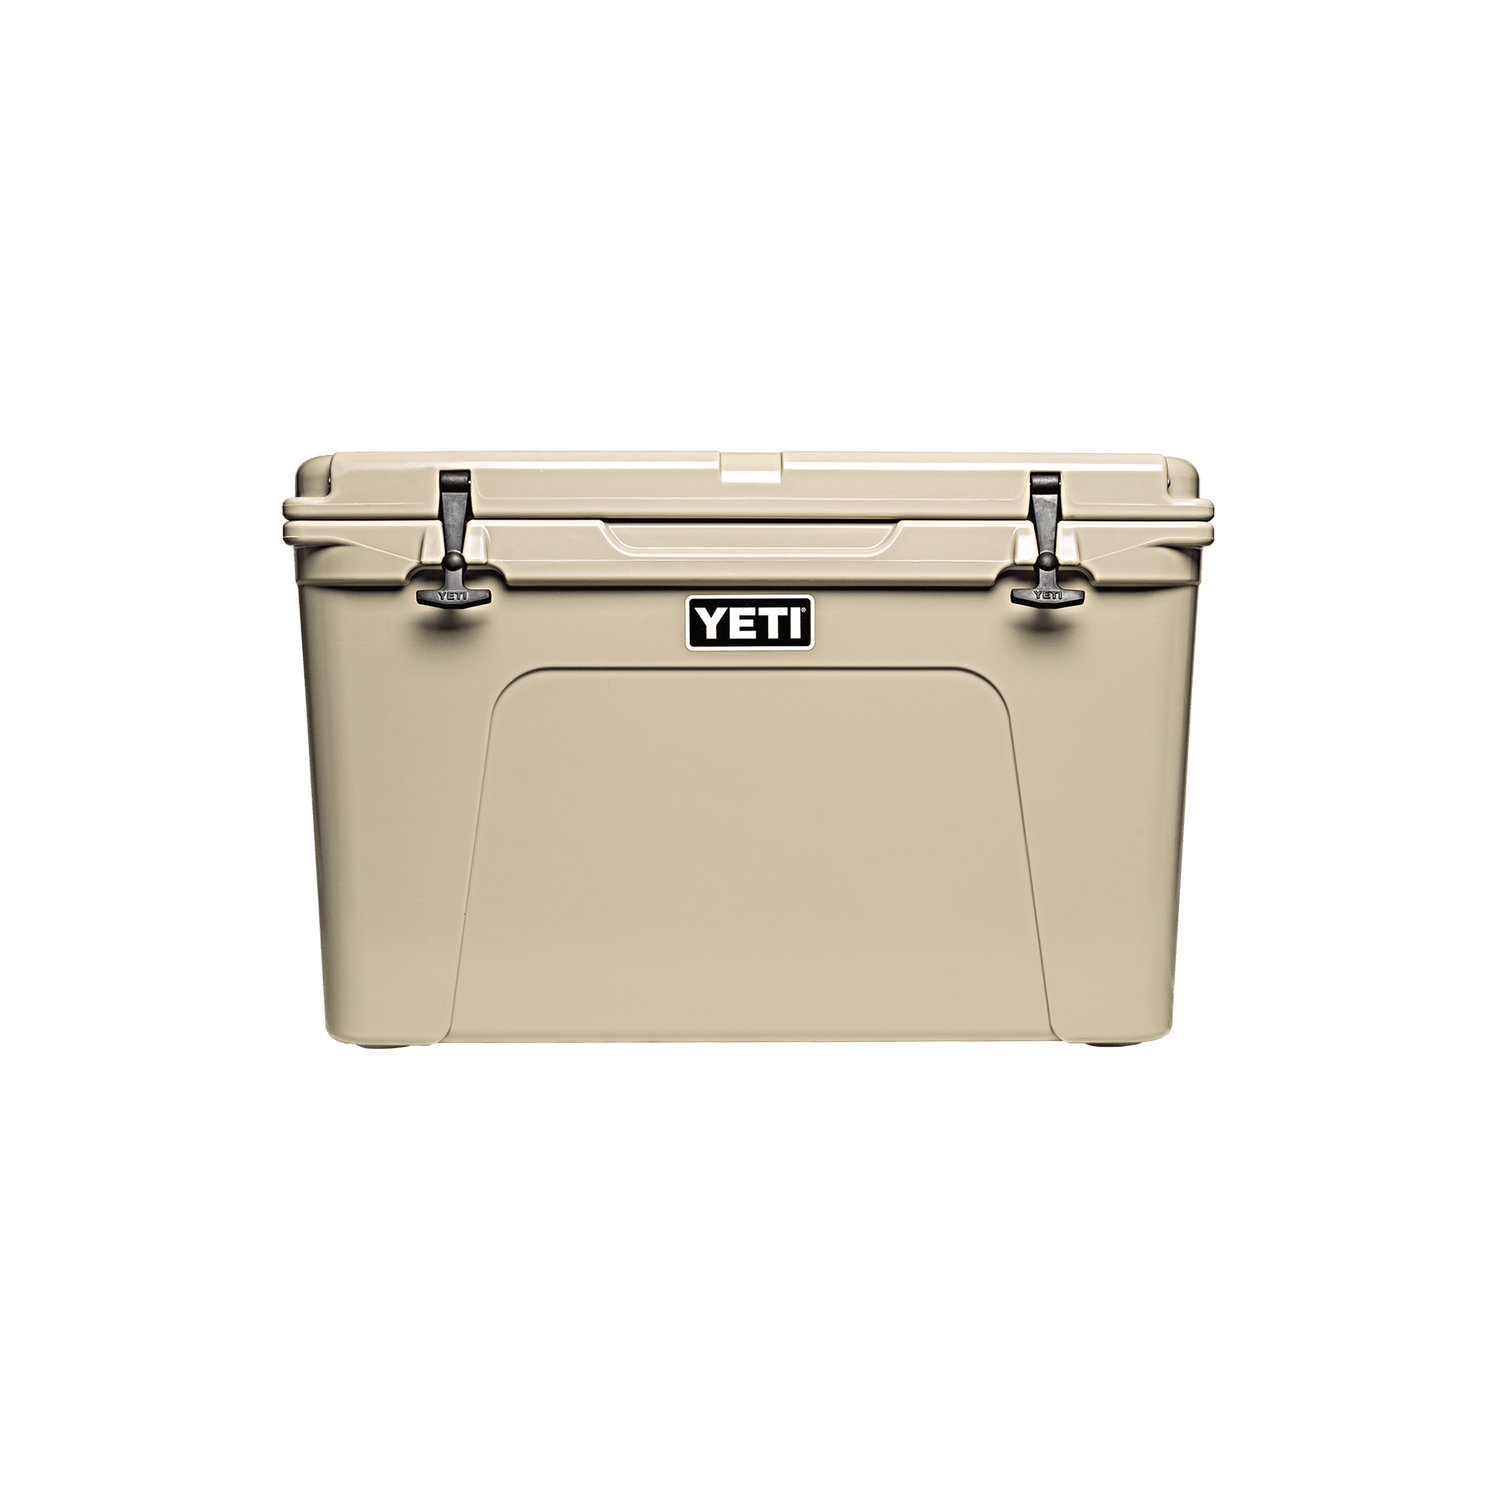 YETI Tundra Coolers, Free UK Delivery